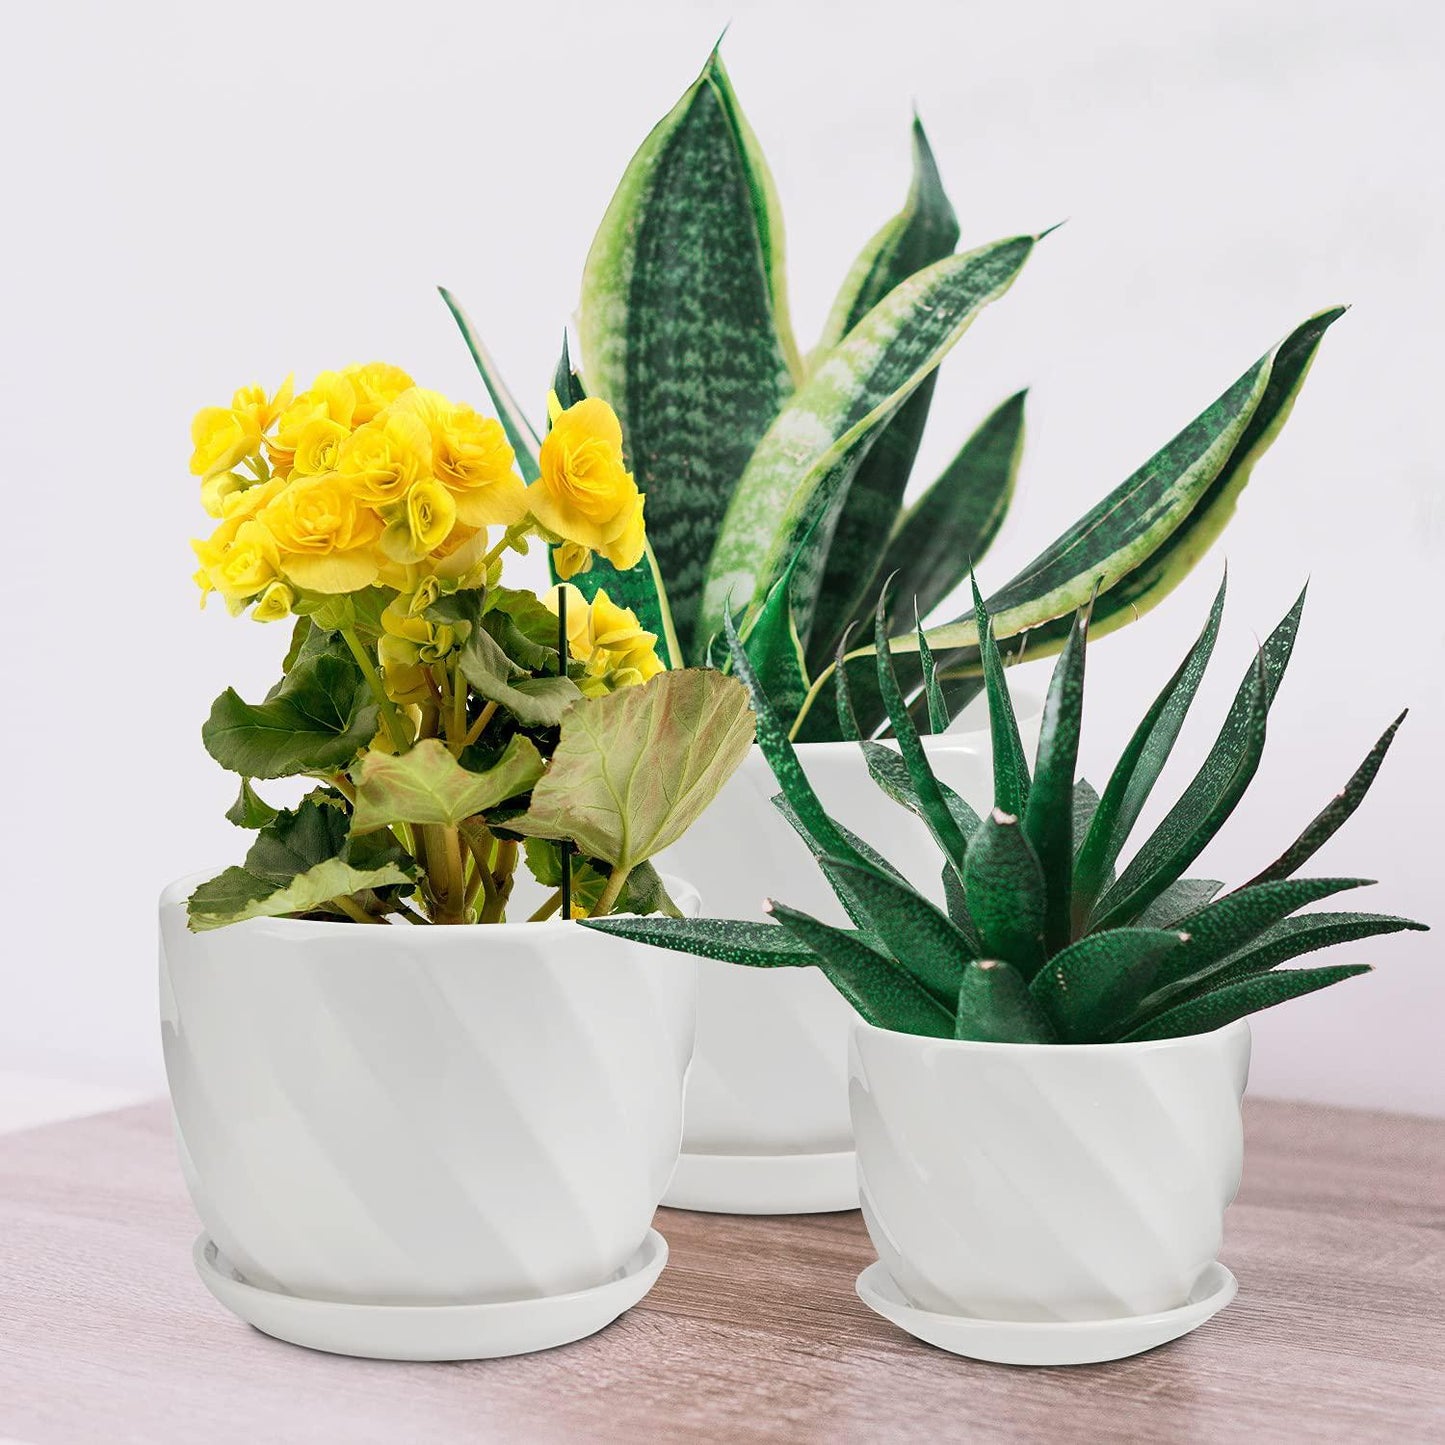 Laerjin Plant Pots, 4.05 and 5.51 and 6.77 Flower Pot, Ceramic Garden Plant Pots with Connected Saucer for Garden, Set of 3 in Different Sizes